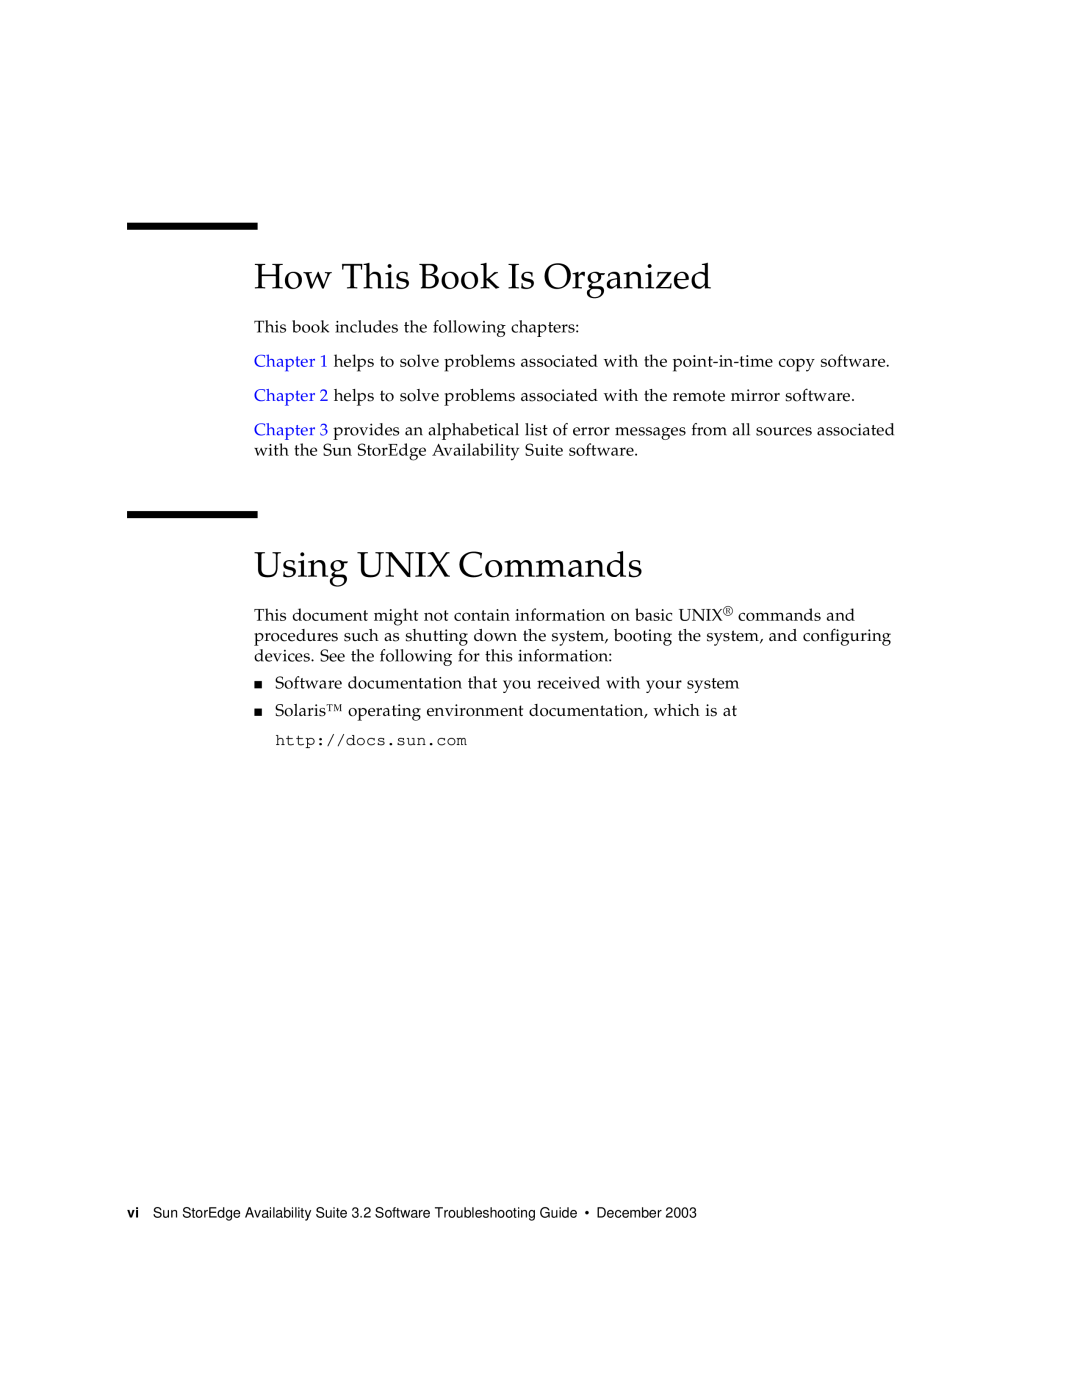 Sun Microsystems 3.2 manual How This Book Is Organized, Using UNIX Commands 